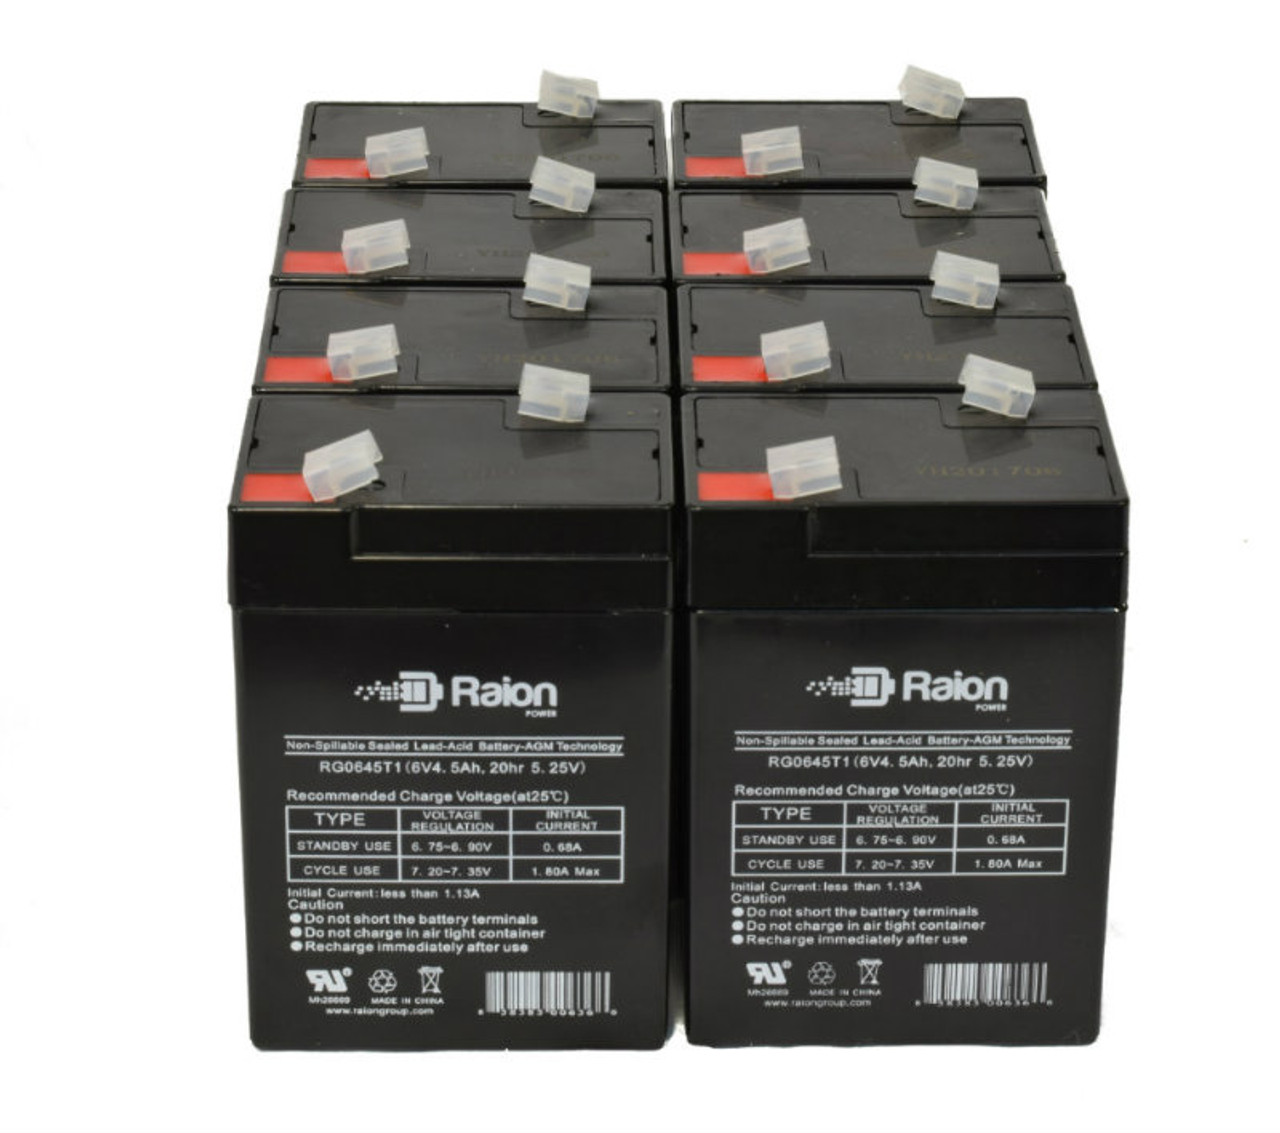 Raion Power RG0645T1 6V 4.5Ah Replacement Medical Equipment Battery for Criticare Systems 502Us Pulse Oximeters - 8 Pack